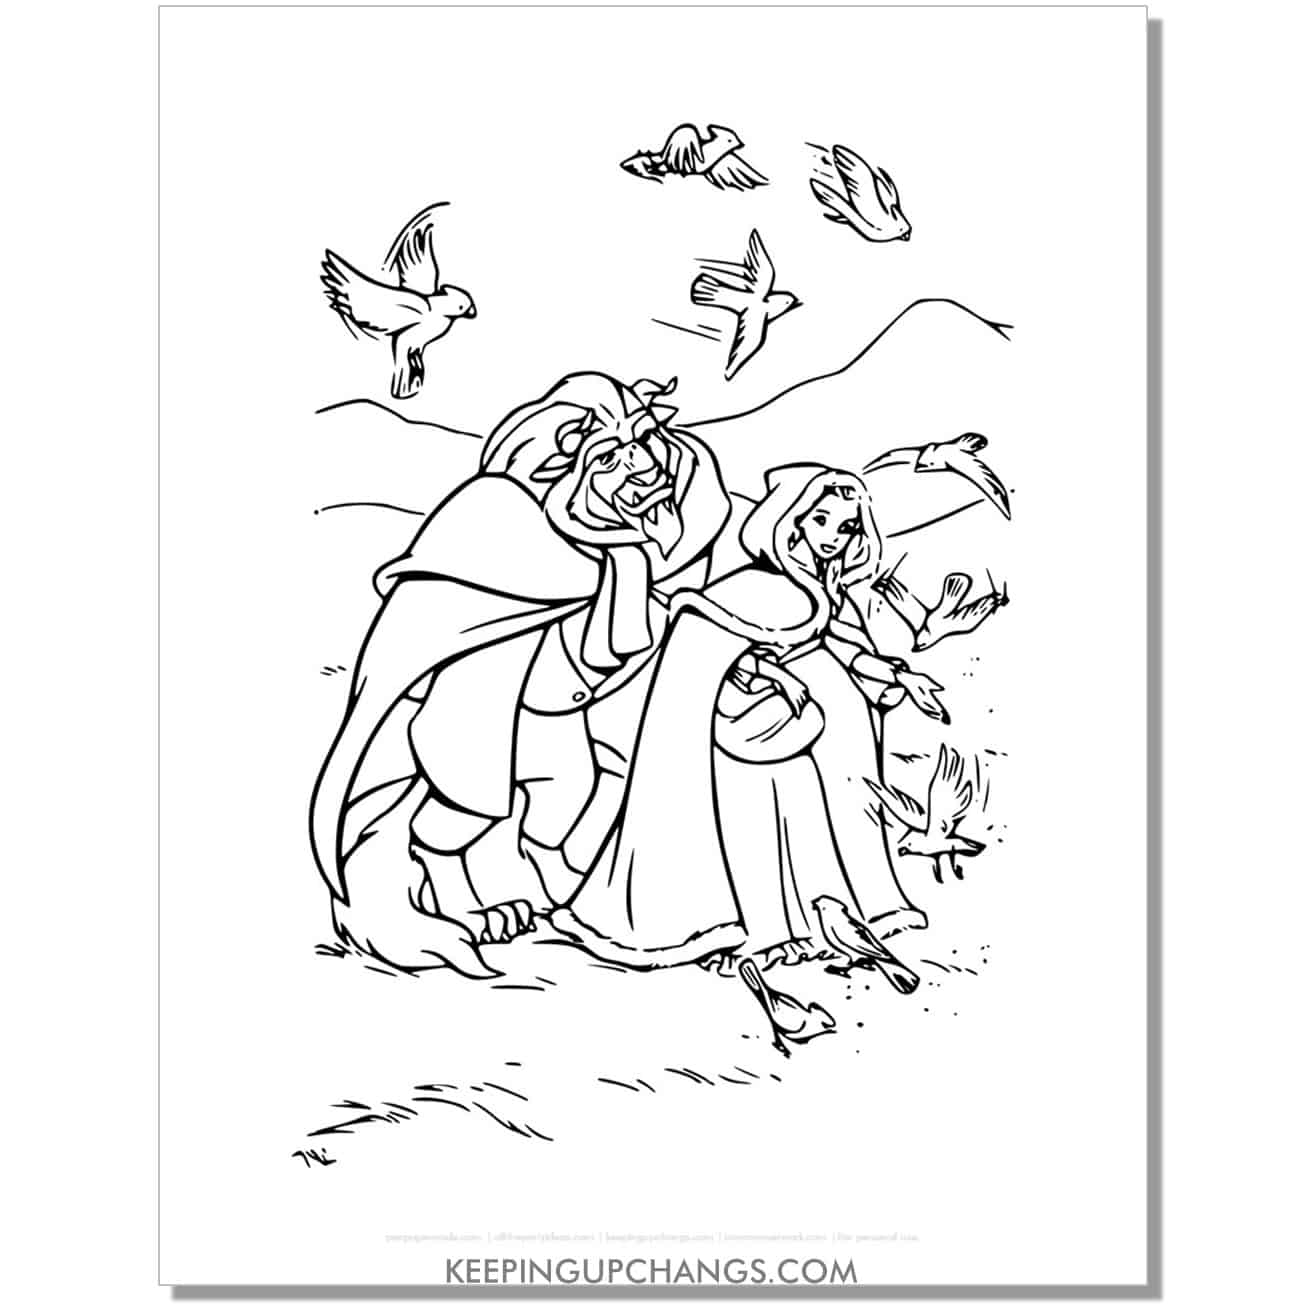 beauty and beast feeding birds coloring page, sheet.